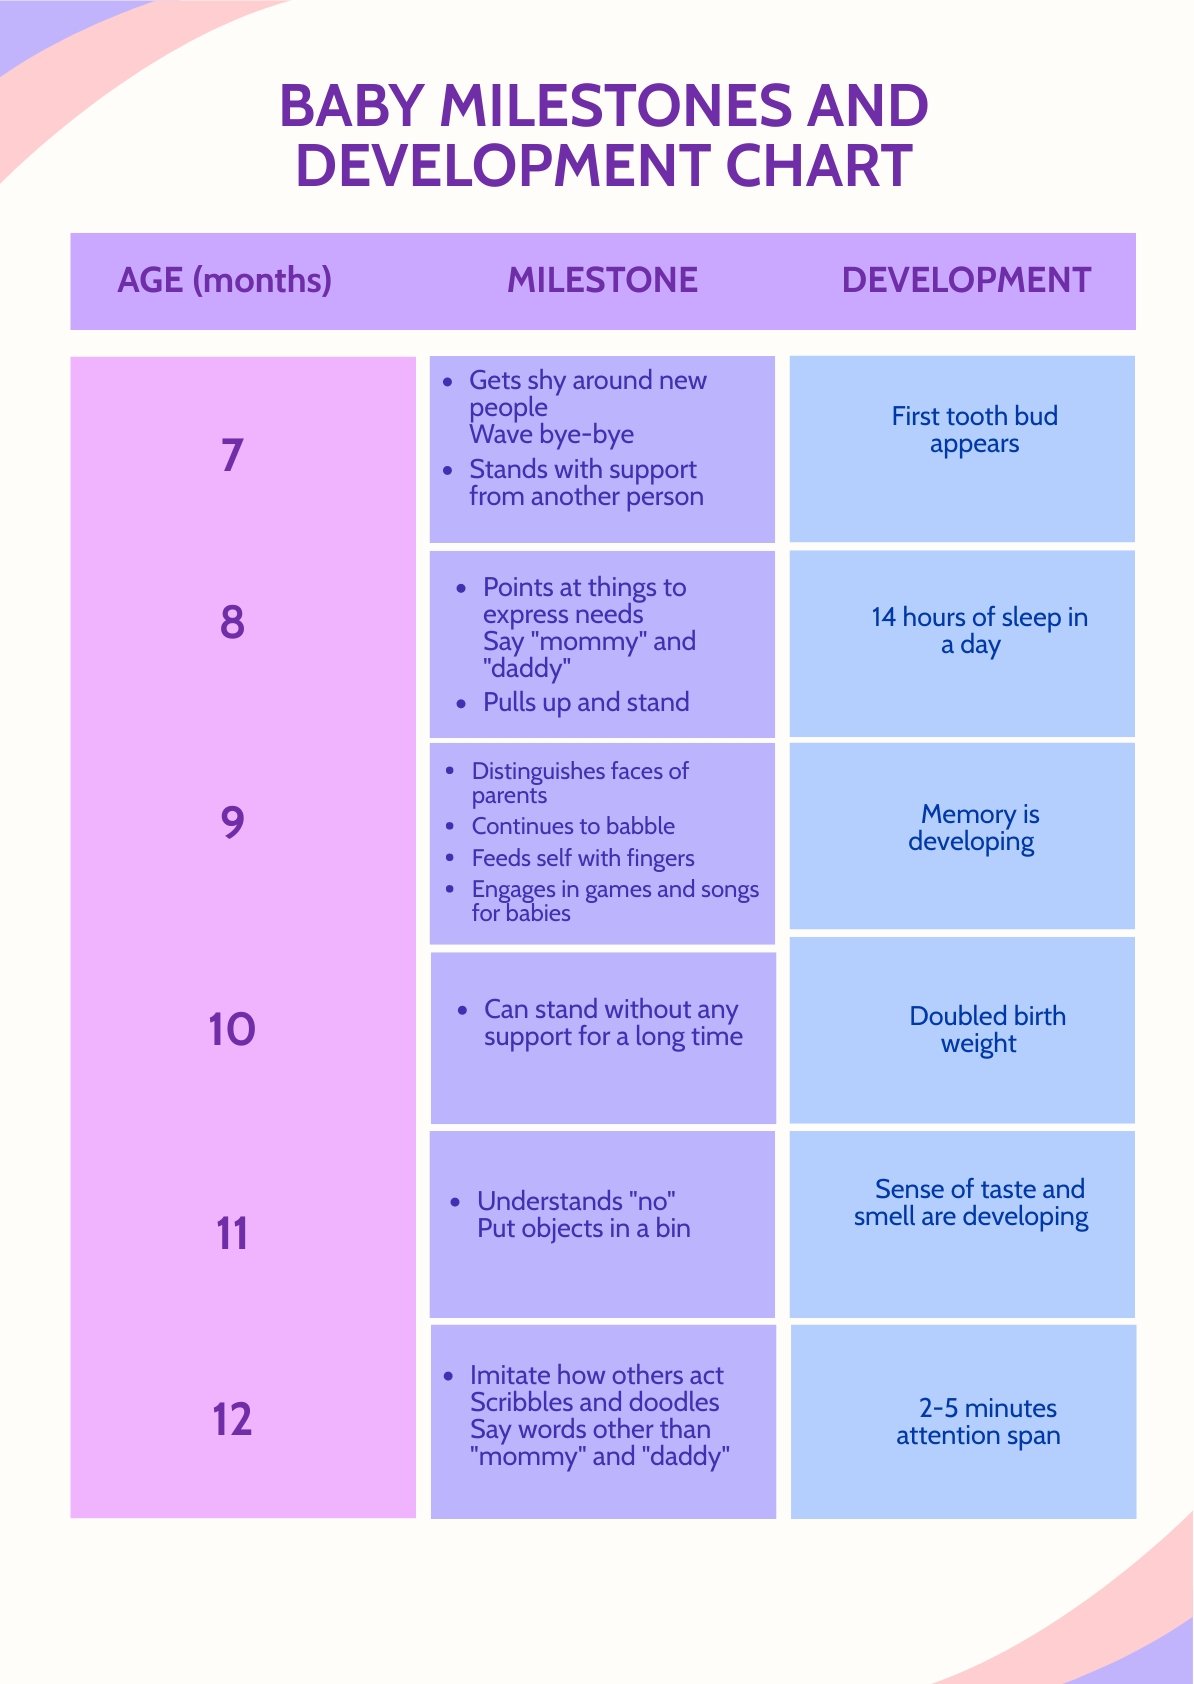 Baby Milestones And Development Chart in PSD - Download | Template.net